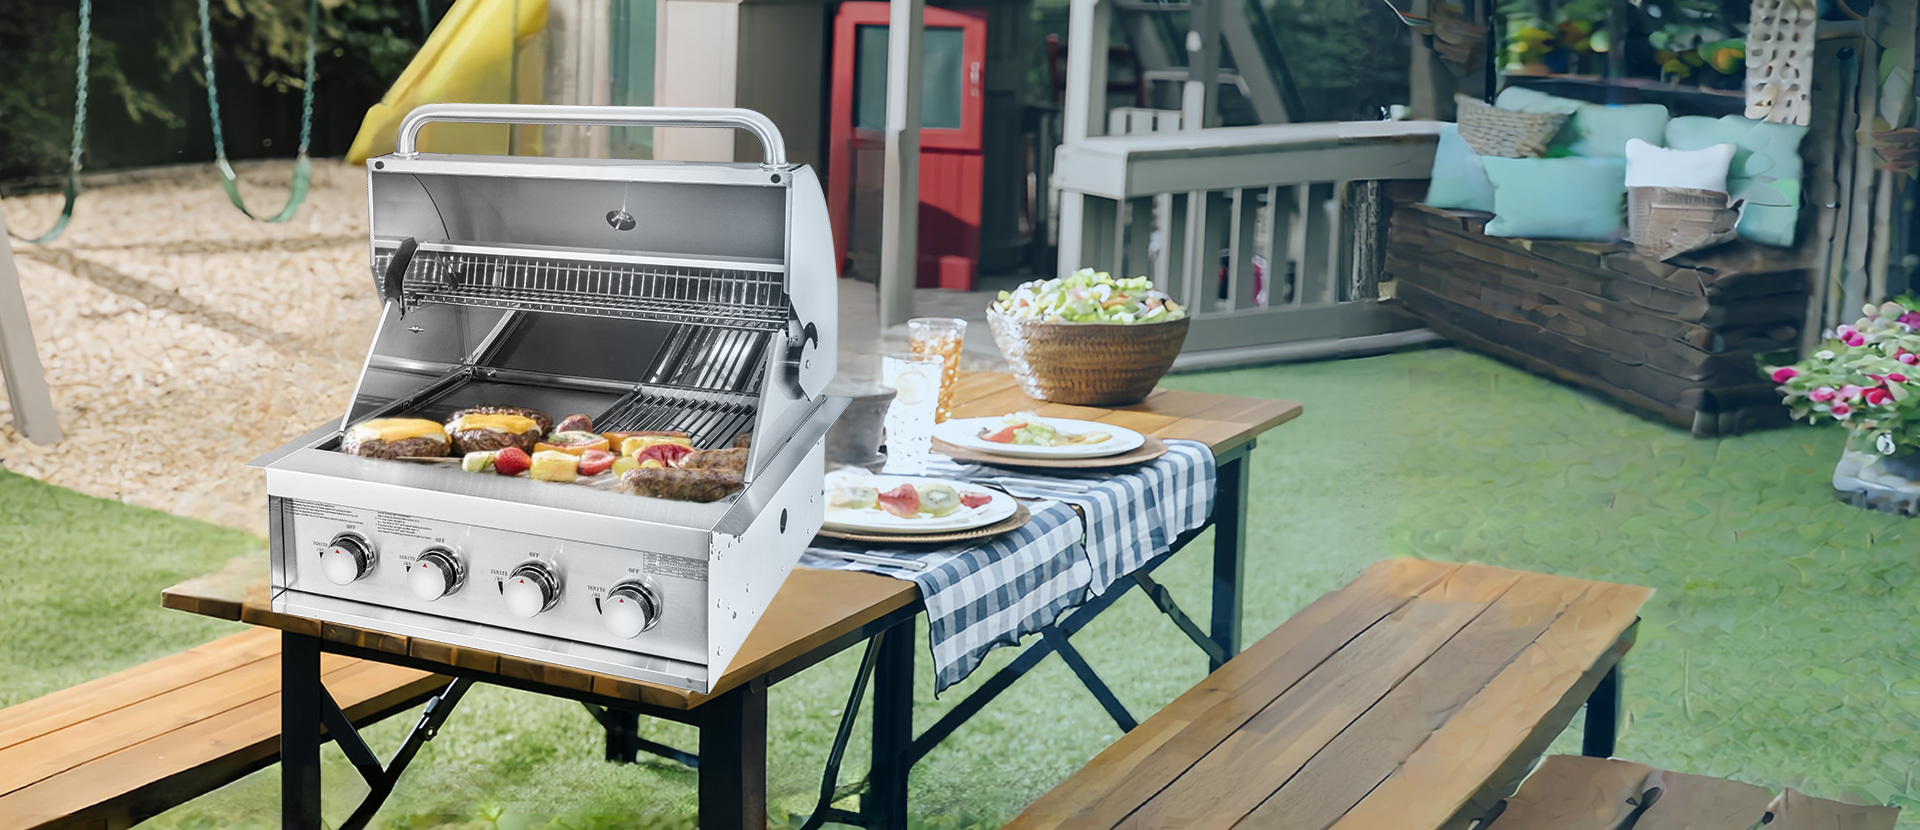 Stainless Steel Outdoor Built In Gas Grill